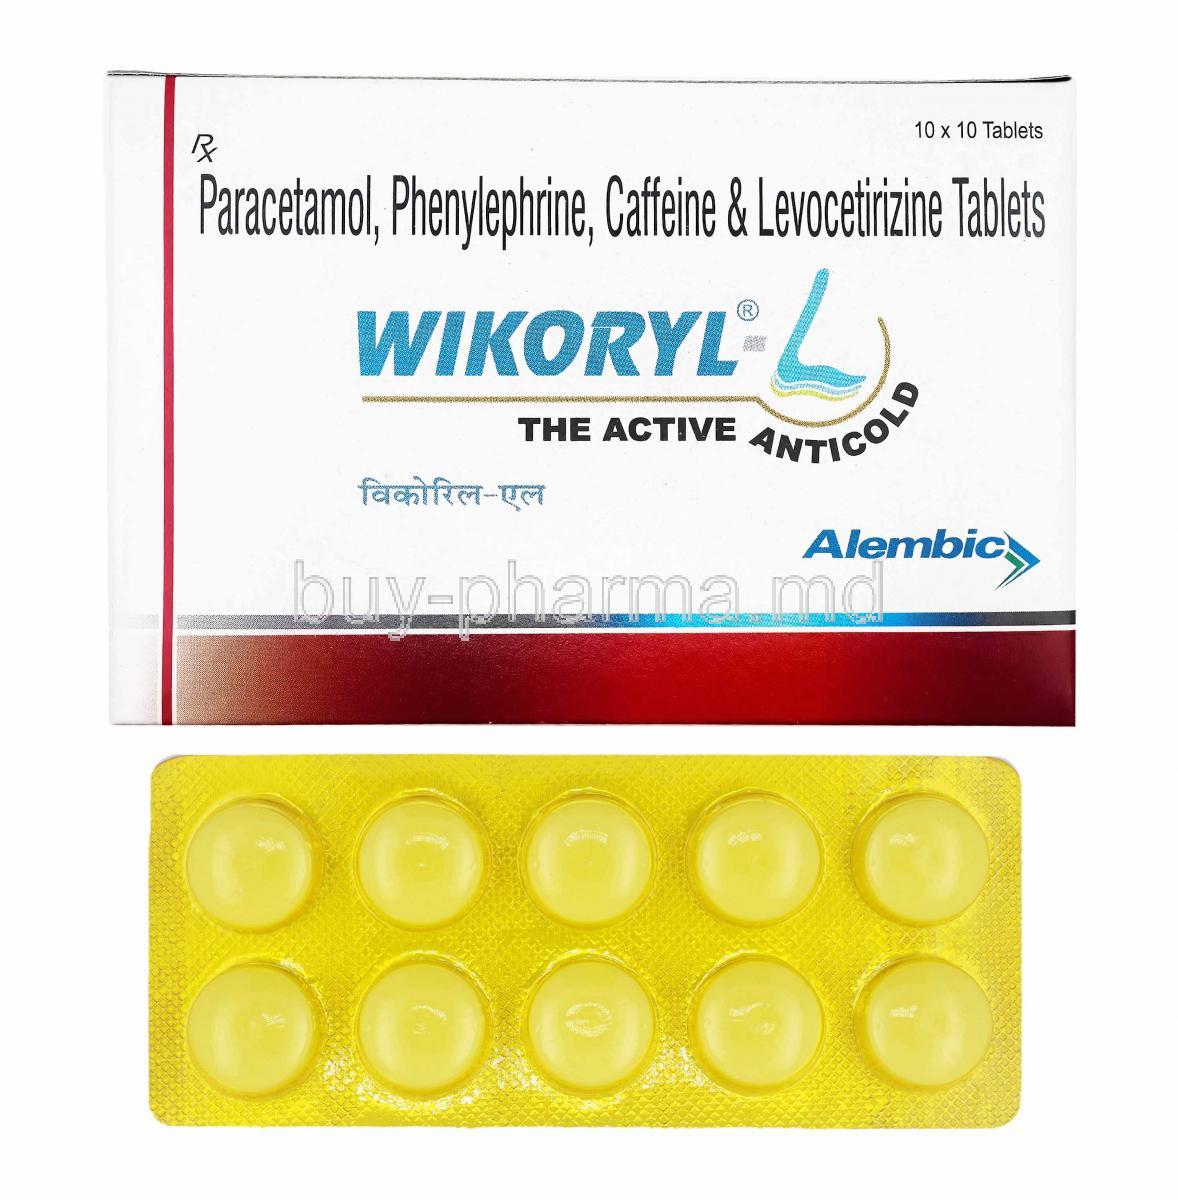 Wikoryl-L, box and tablets